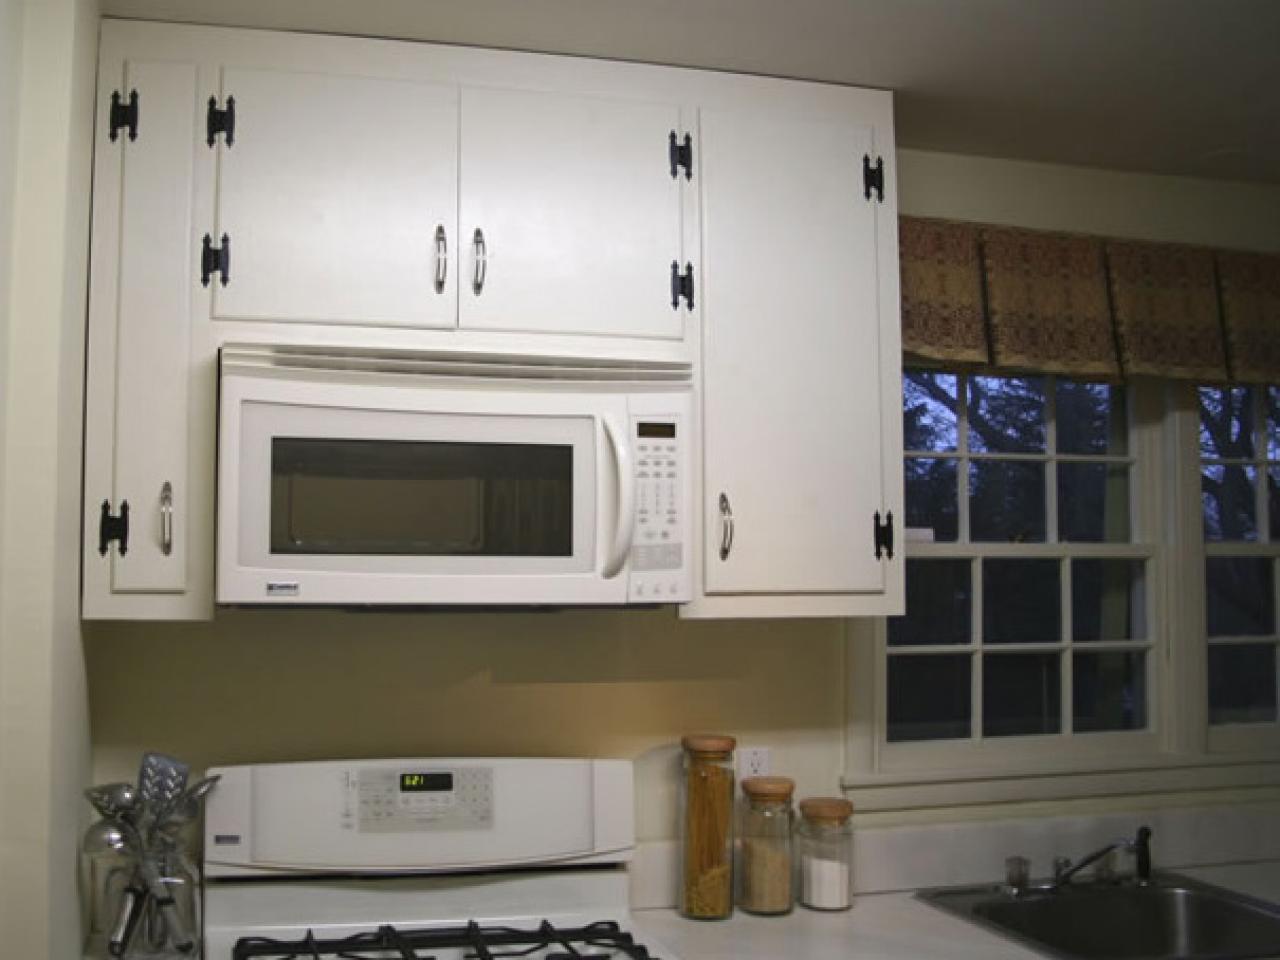 Install Above Range Convection Oven And Cabinet Hgtv